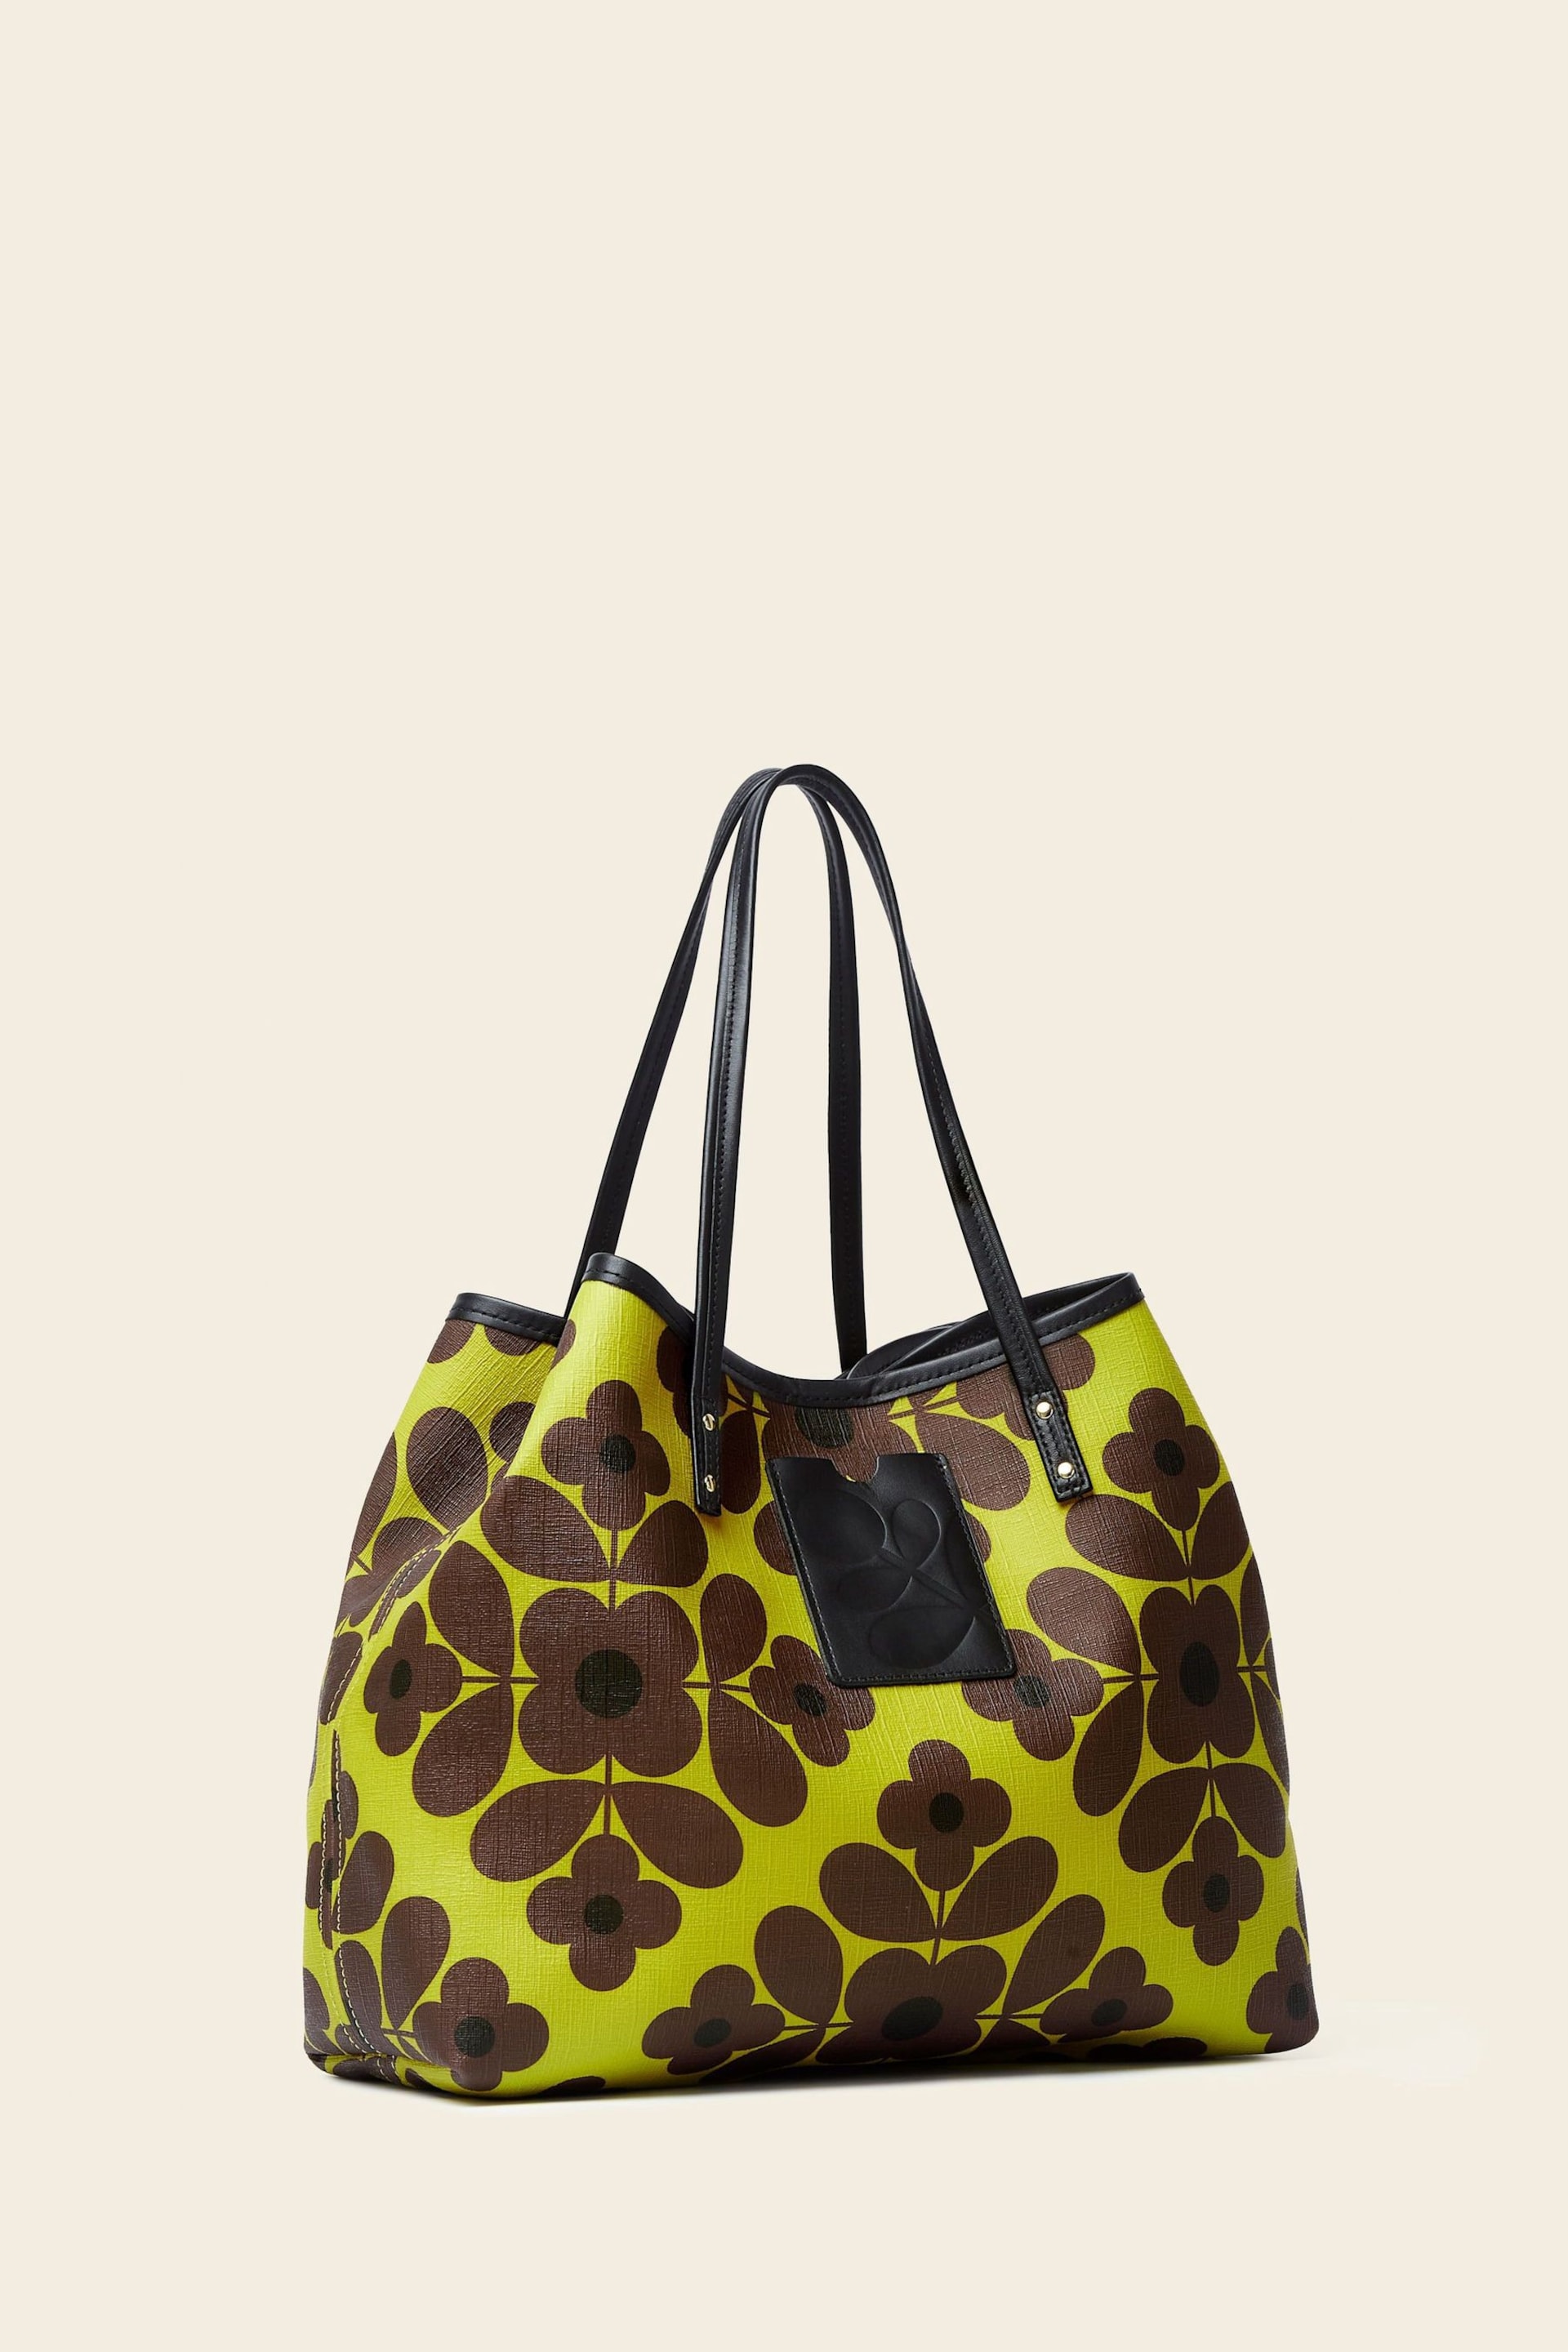 Orla Kiely Green Carrymore Tote Bag - Image 4 of 4